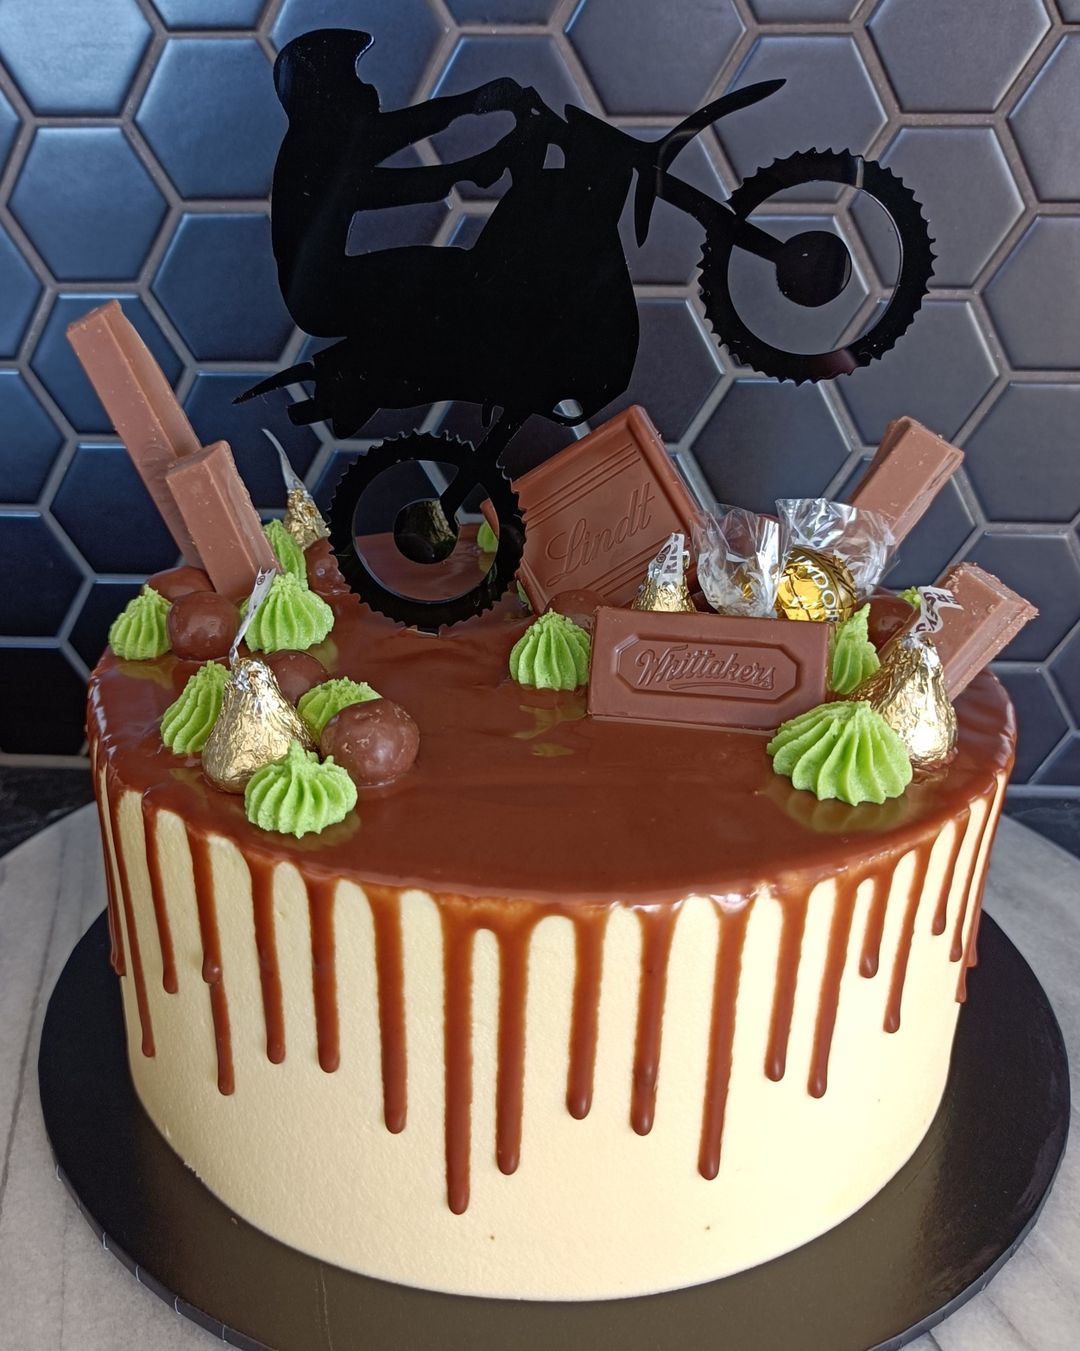 MOTOR BIKE BIRTHDAY PARTY PERSONALISED ICING EDIBLE COSTCO CAKE TOPPER  R3-759 | eBay